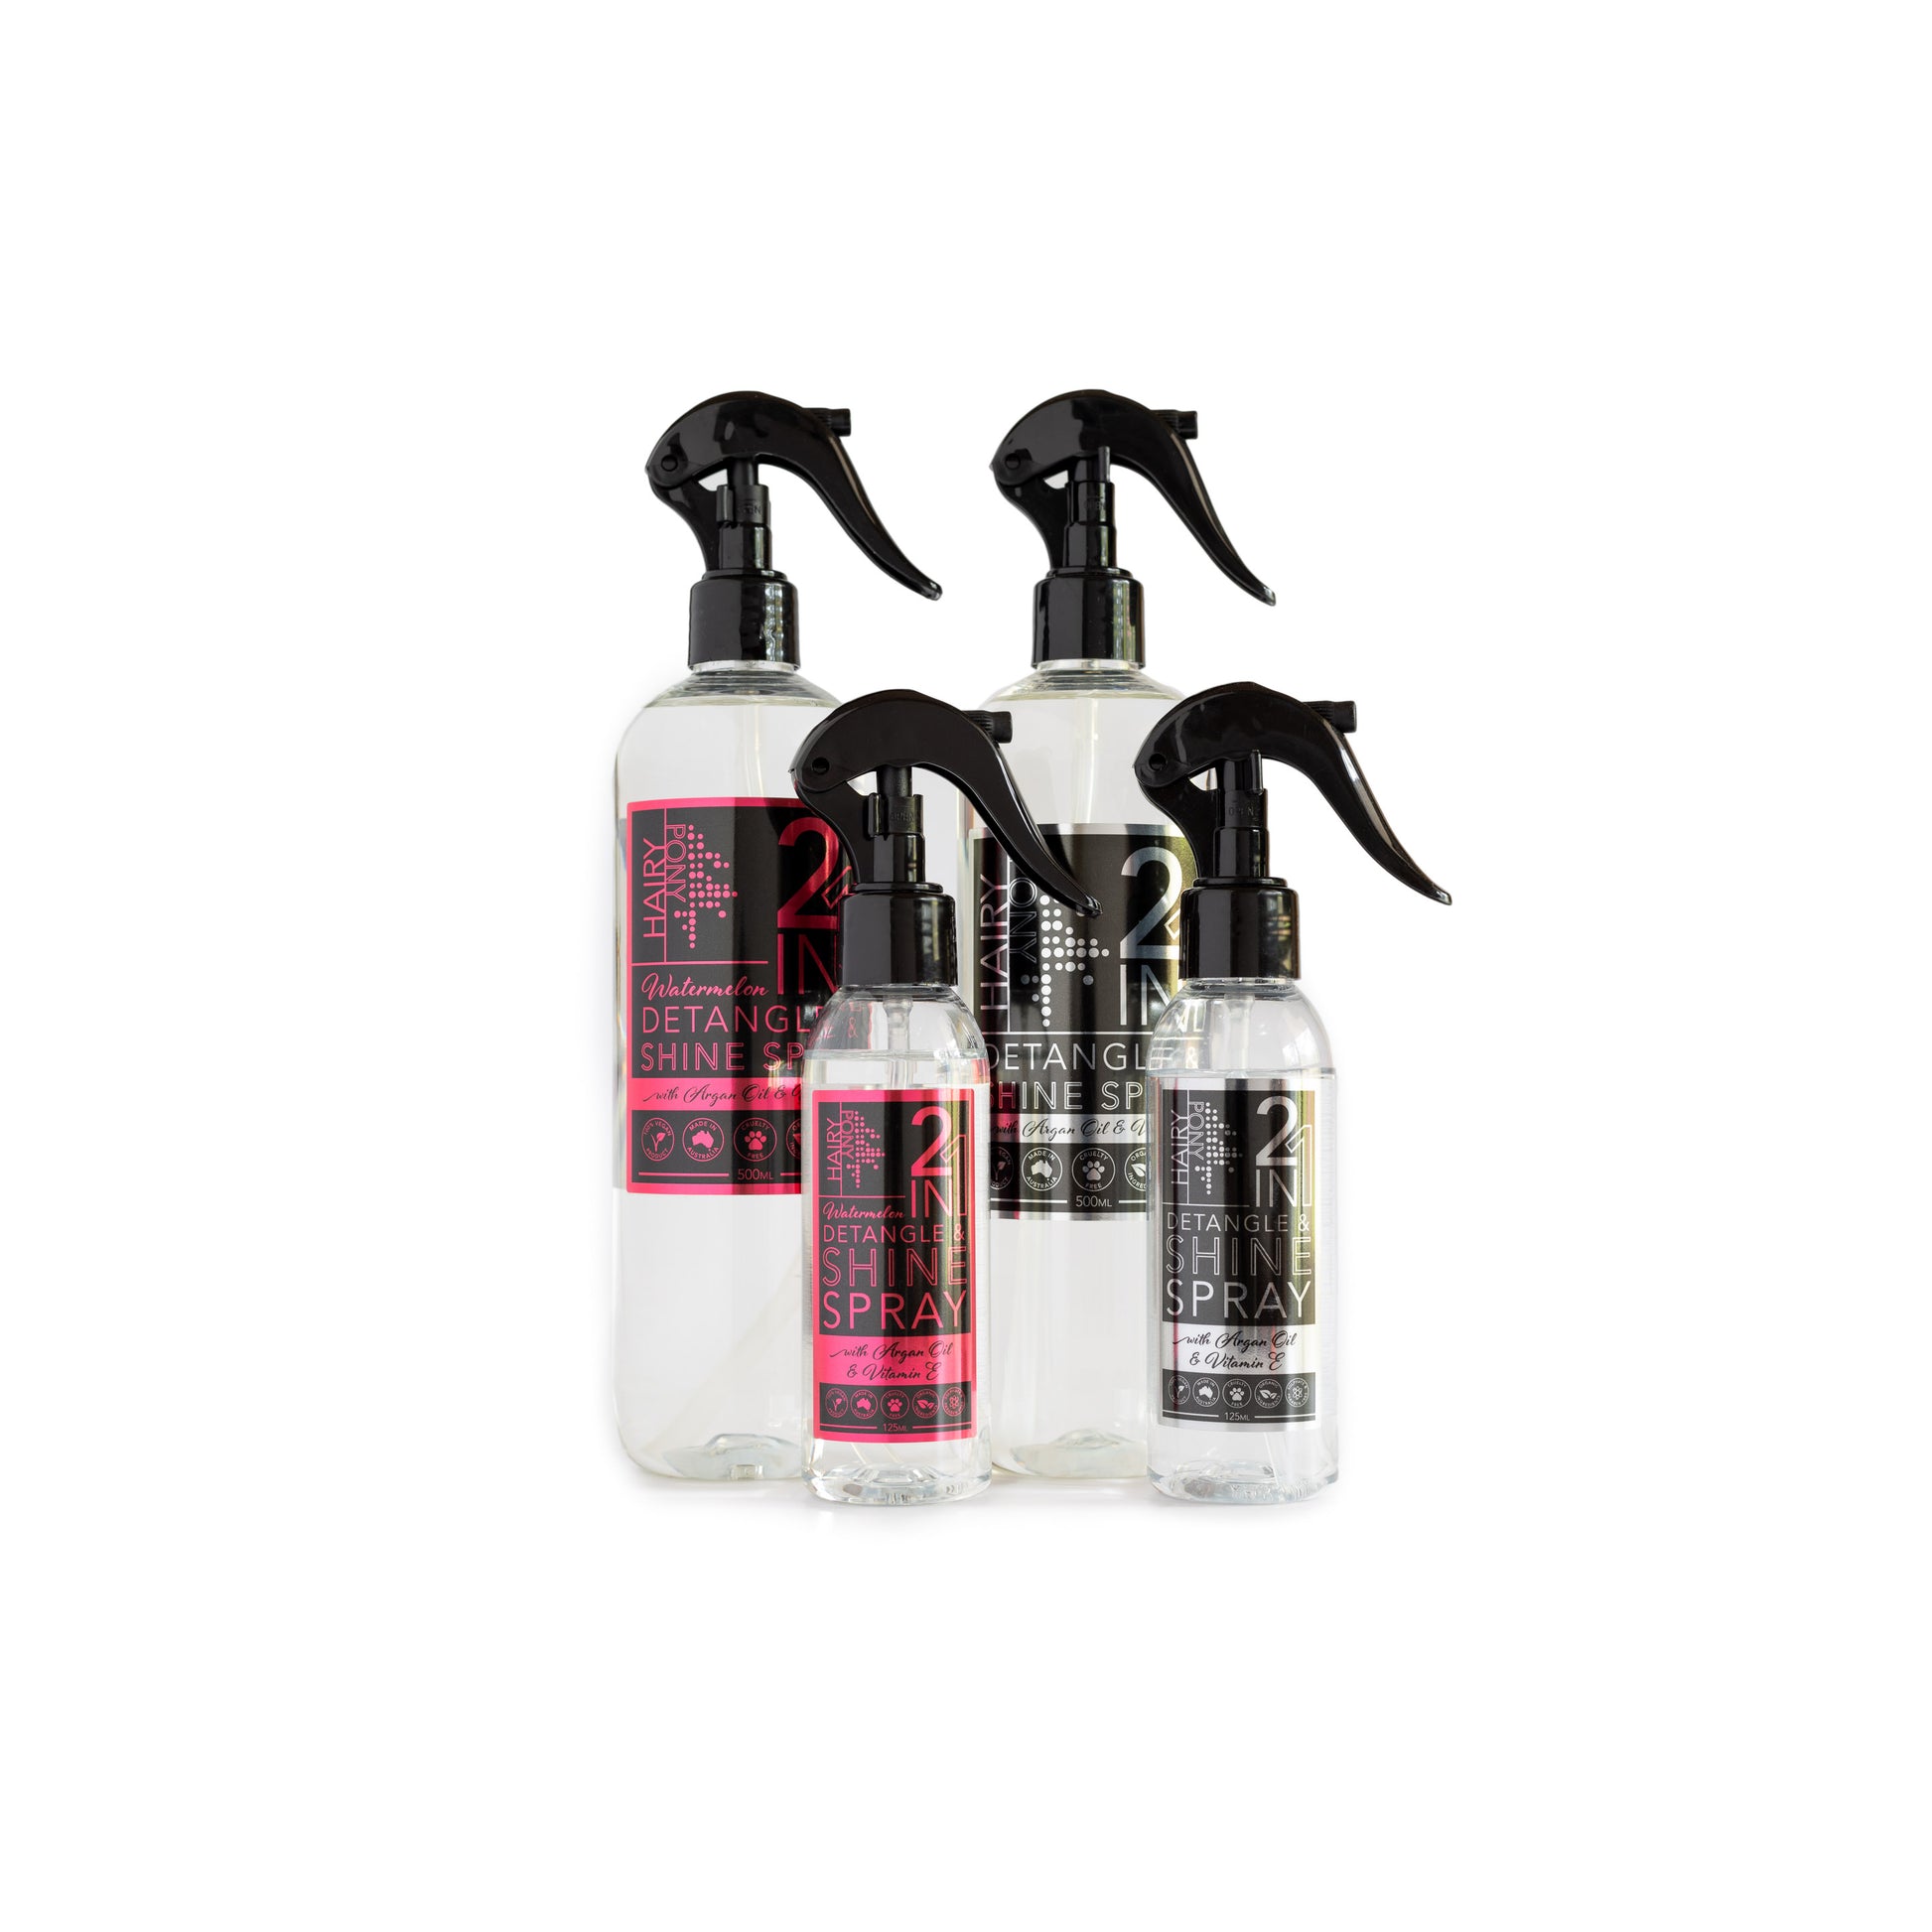 An image showing the original 2 In 1 Detangle & Shine Spray, alongside the watermelon scented version.